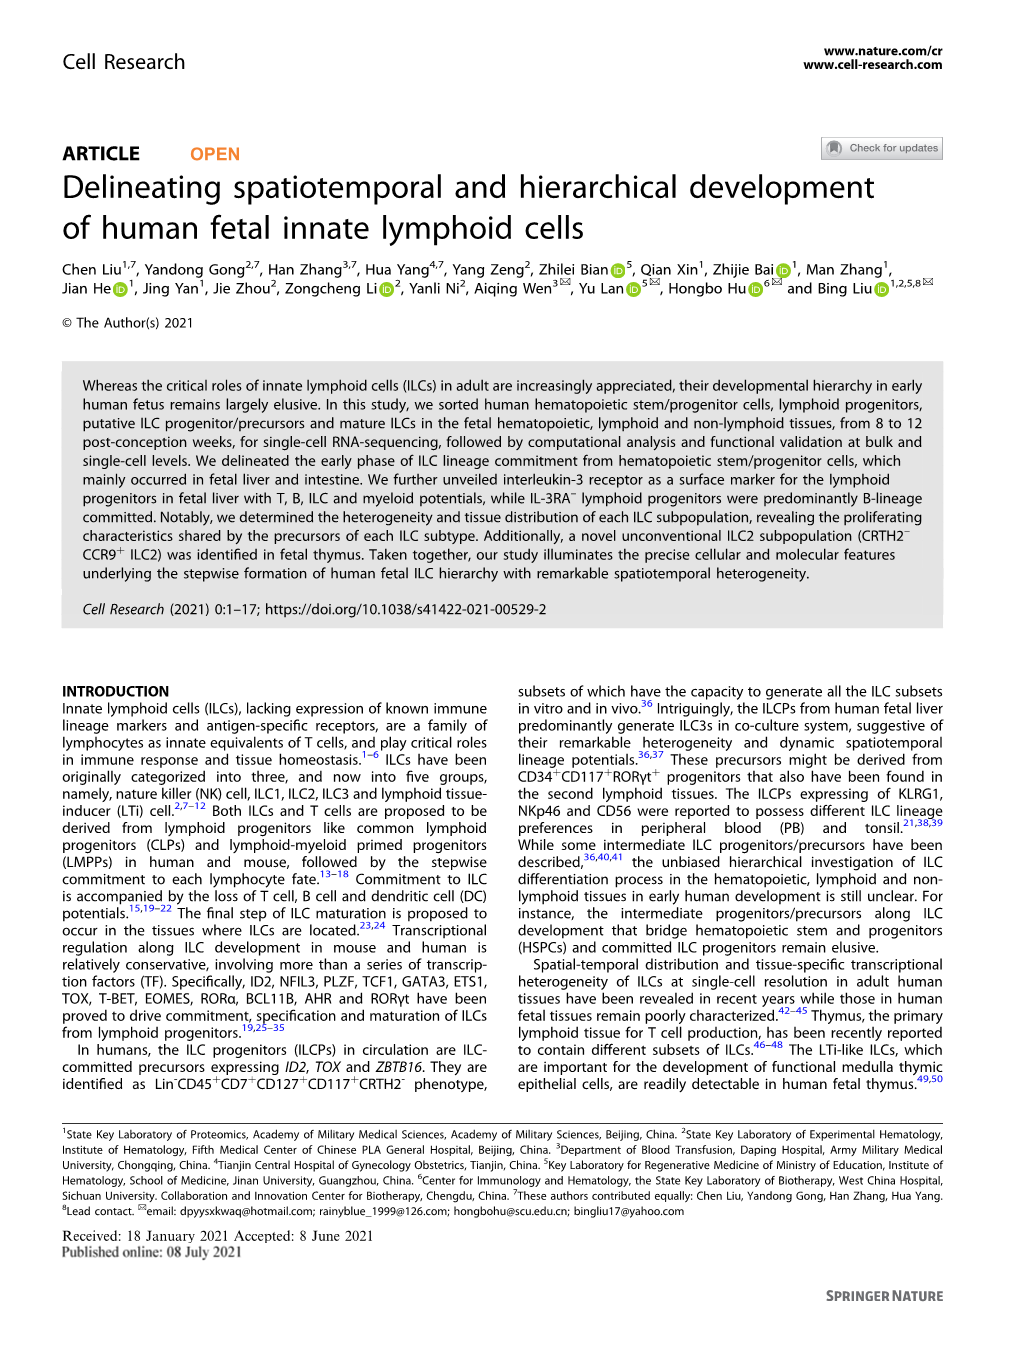 Delineating Spatiotemporal and Hierarchical Development of Human Fetal Innate Lymphoid Cells